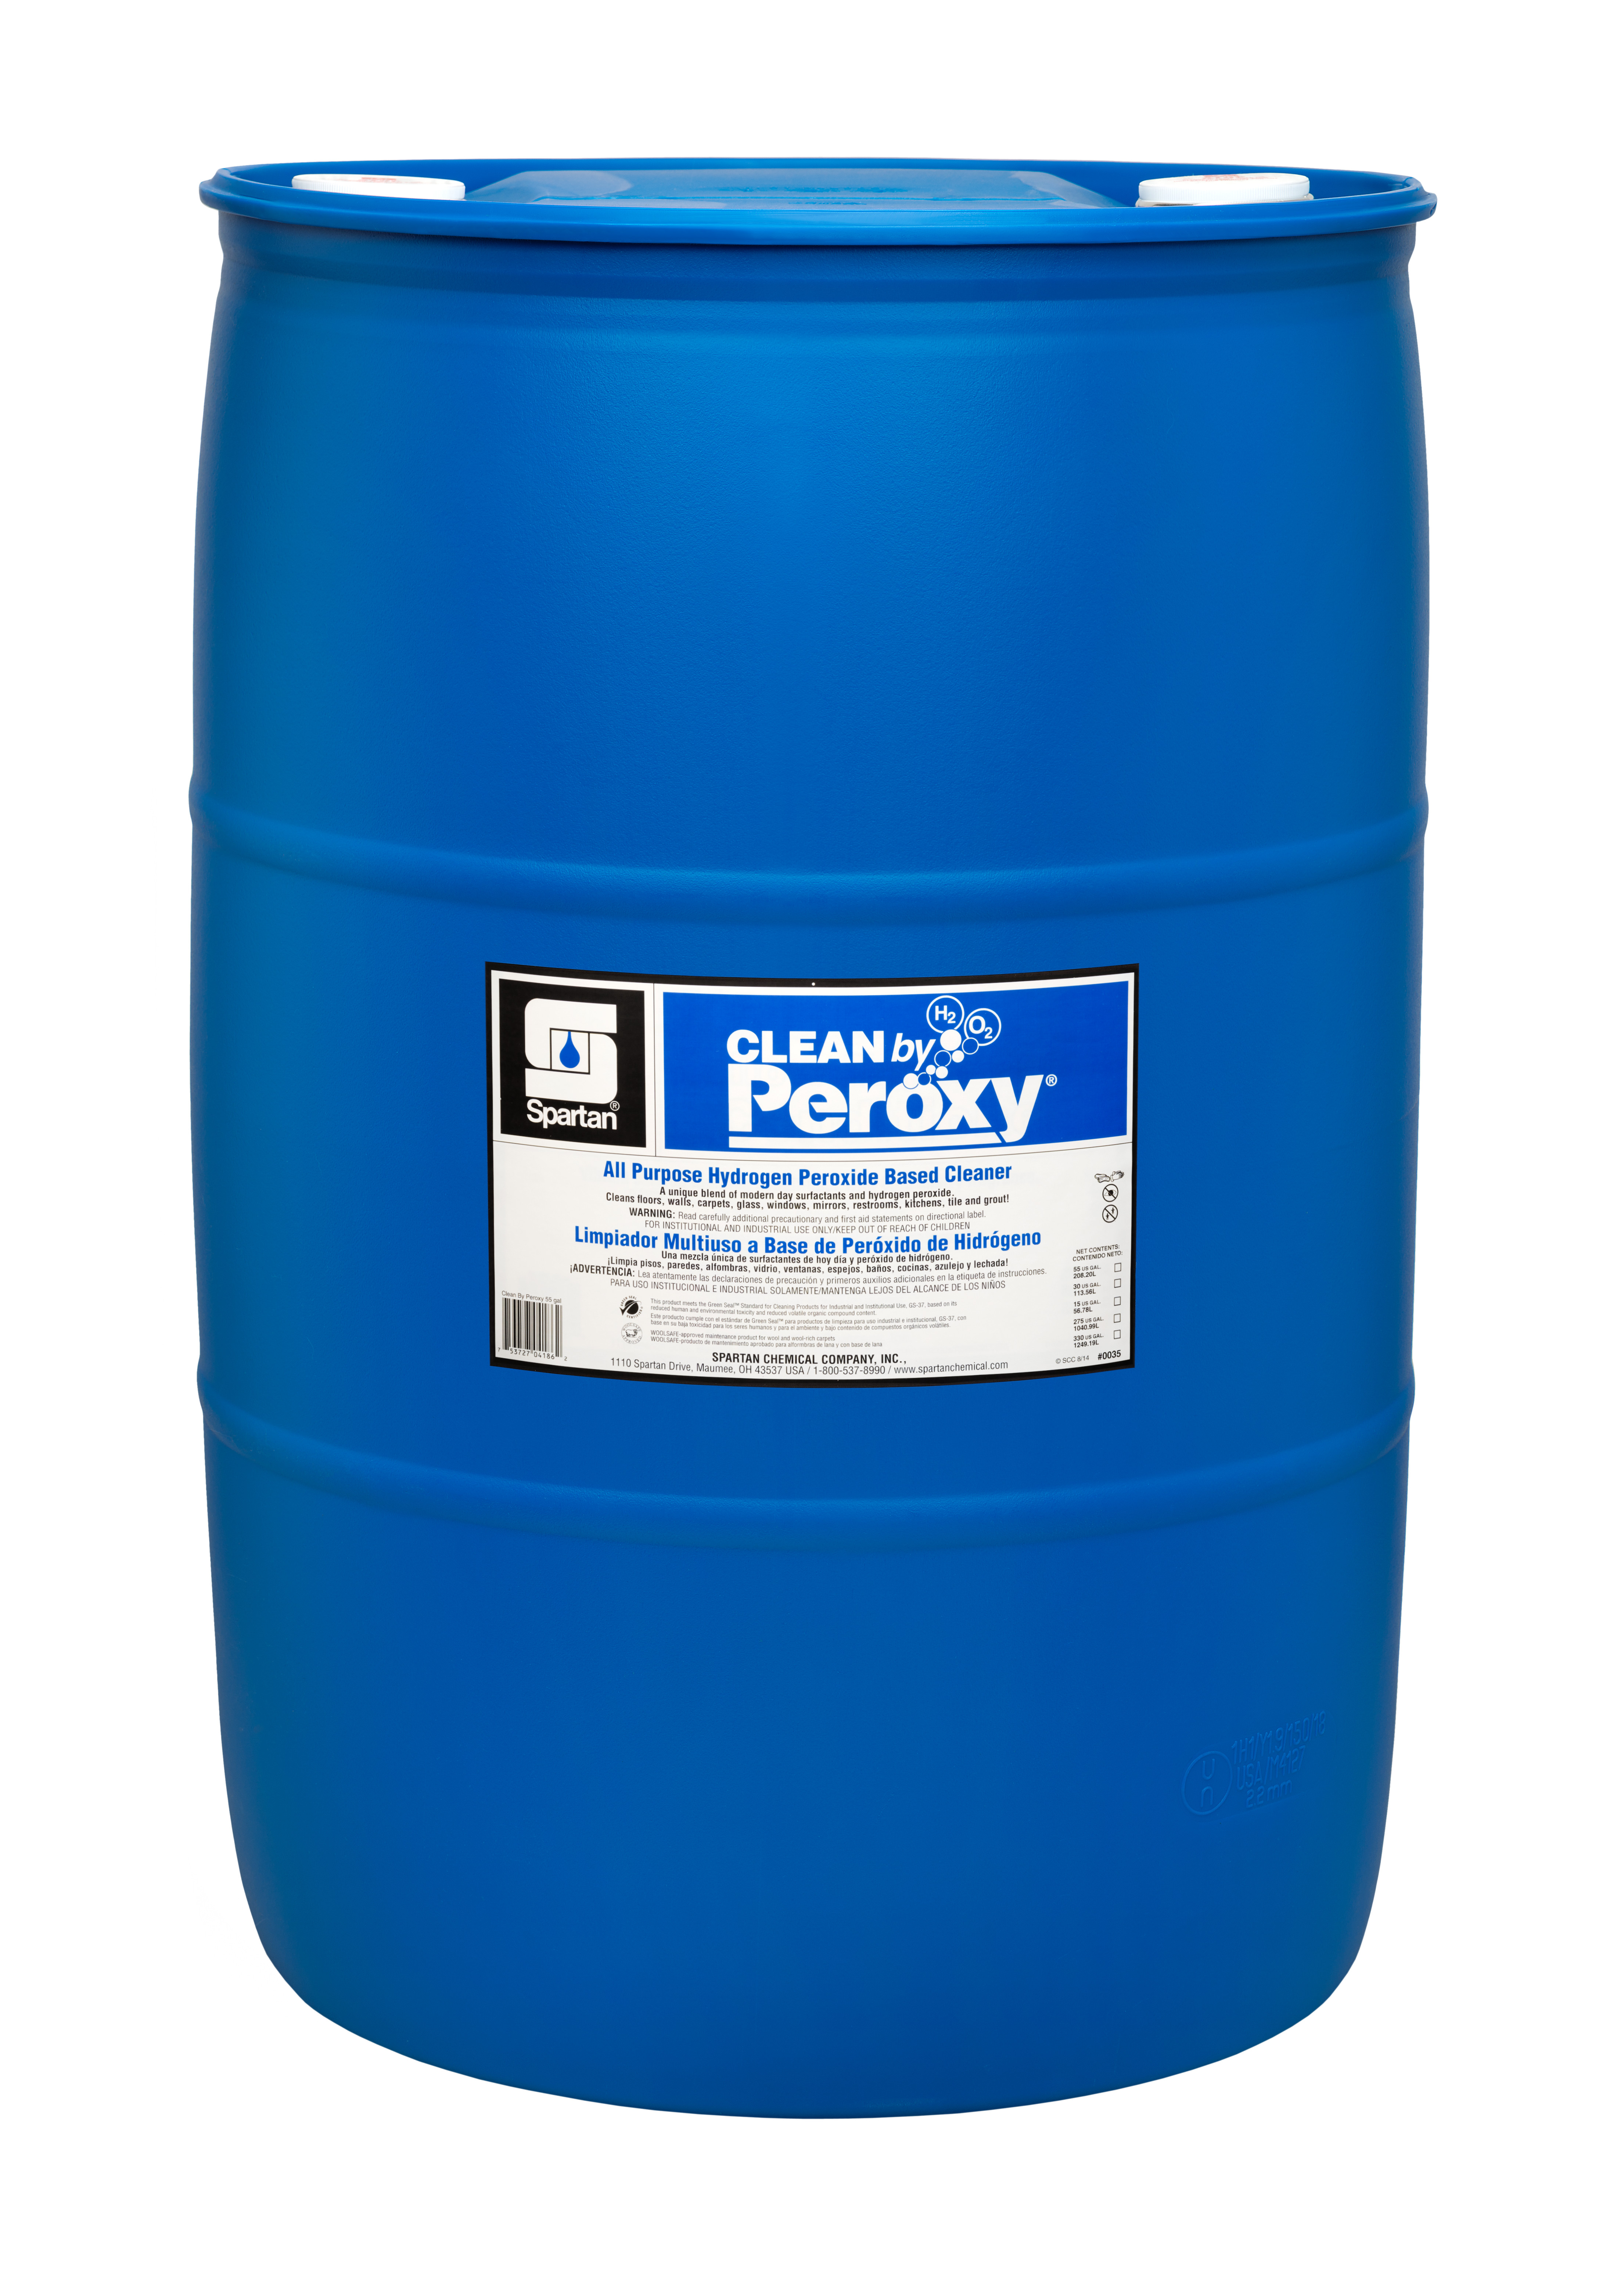 Spartan Chemical Company Clean by Peroxy, 55 GAL DRUM